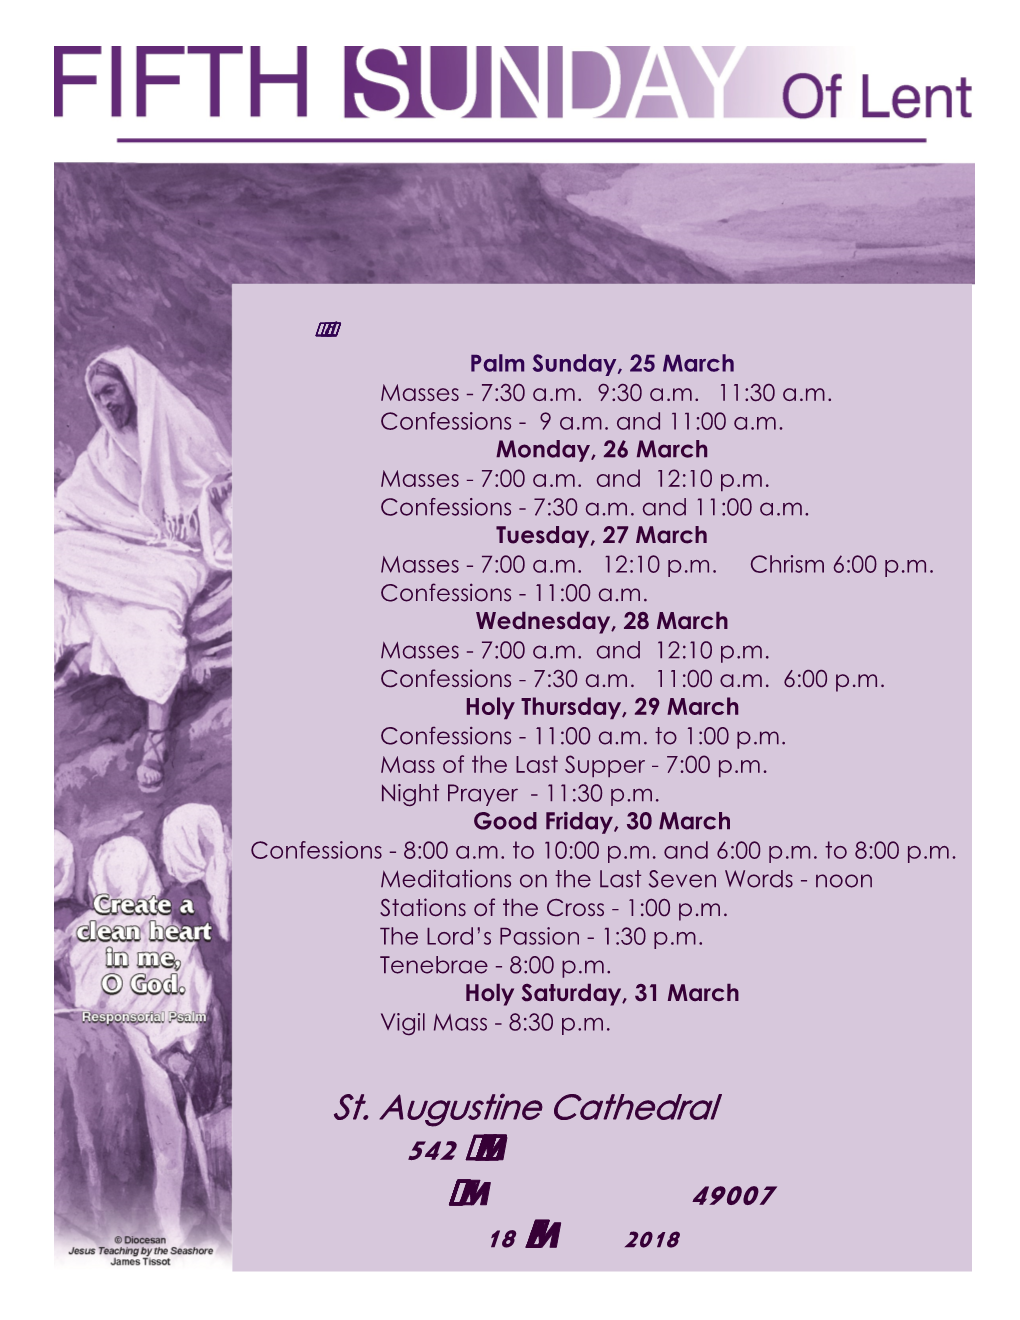 Holy Week Schedule Palm Sunday, 25 March Masses - 7:30 A.M